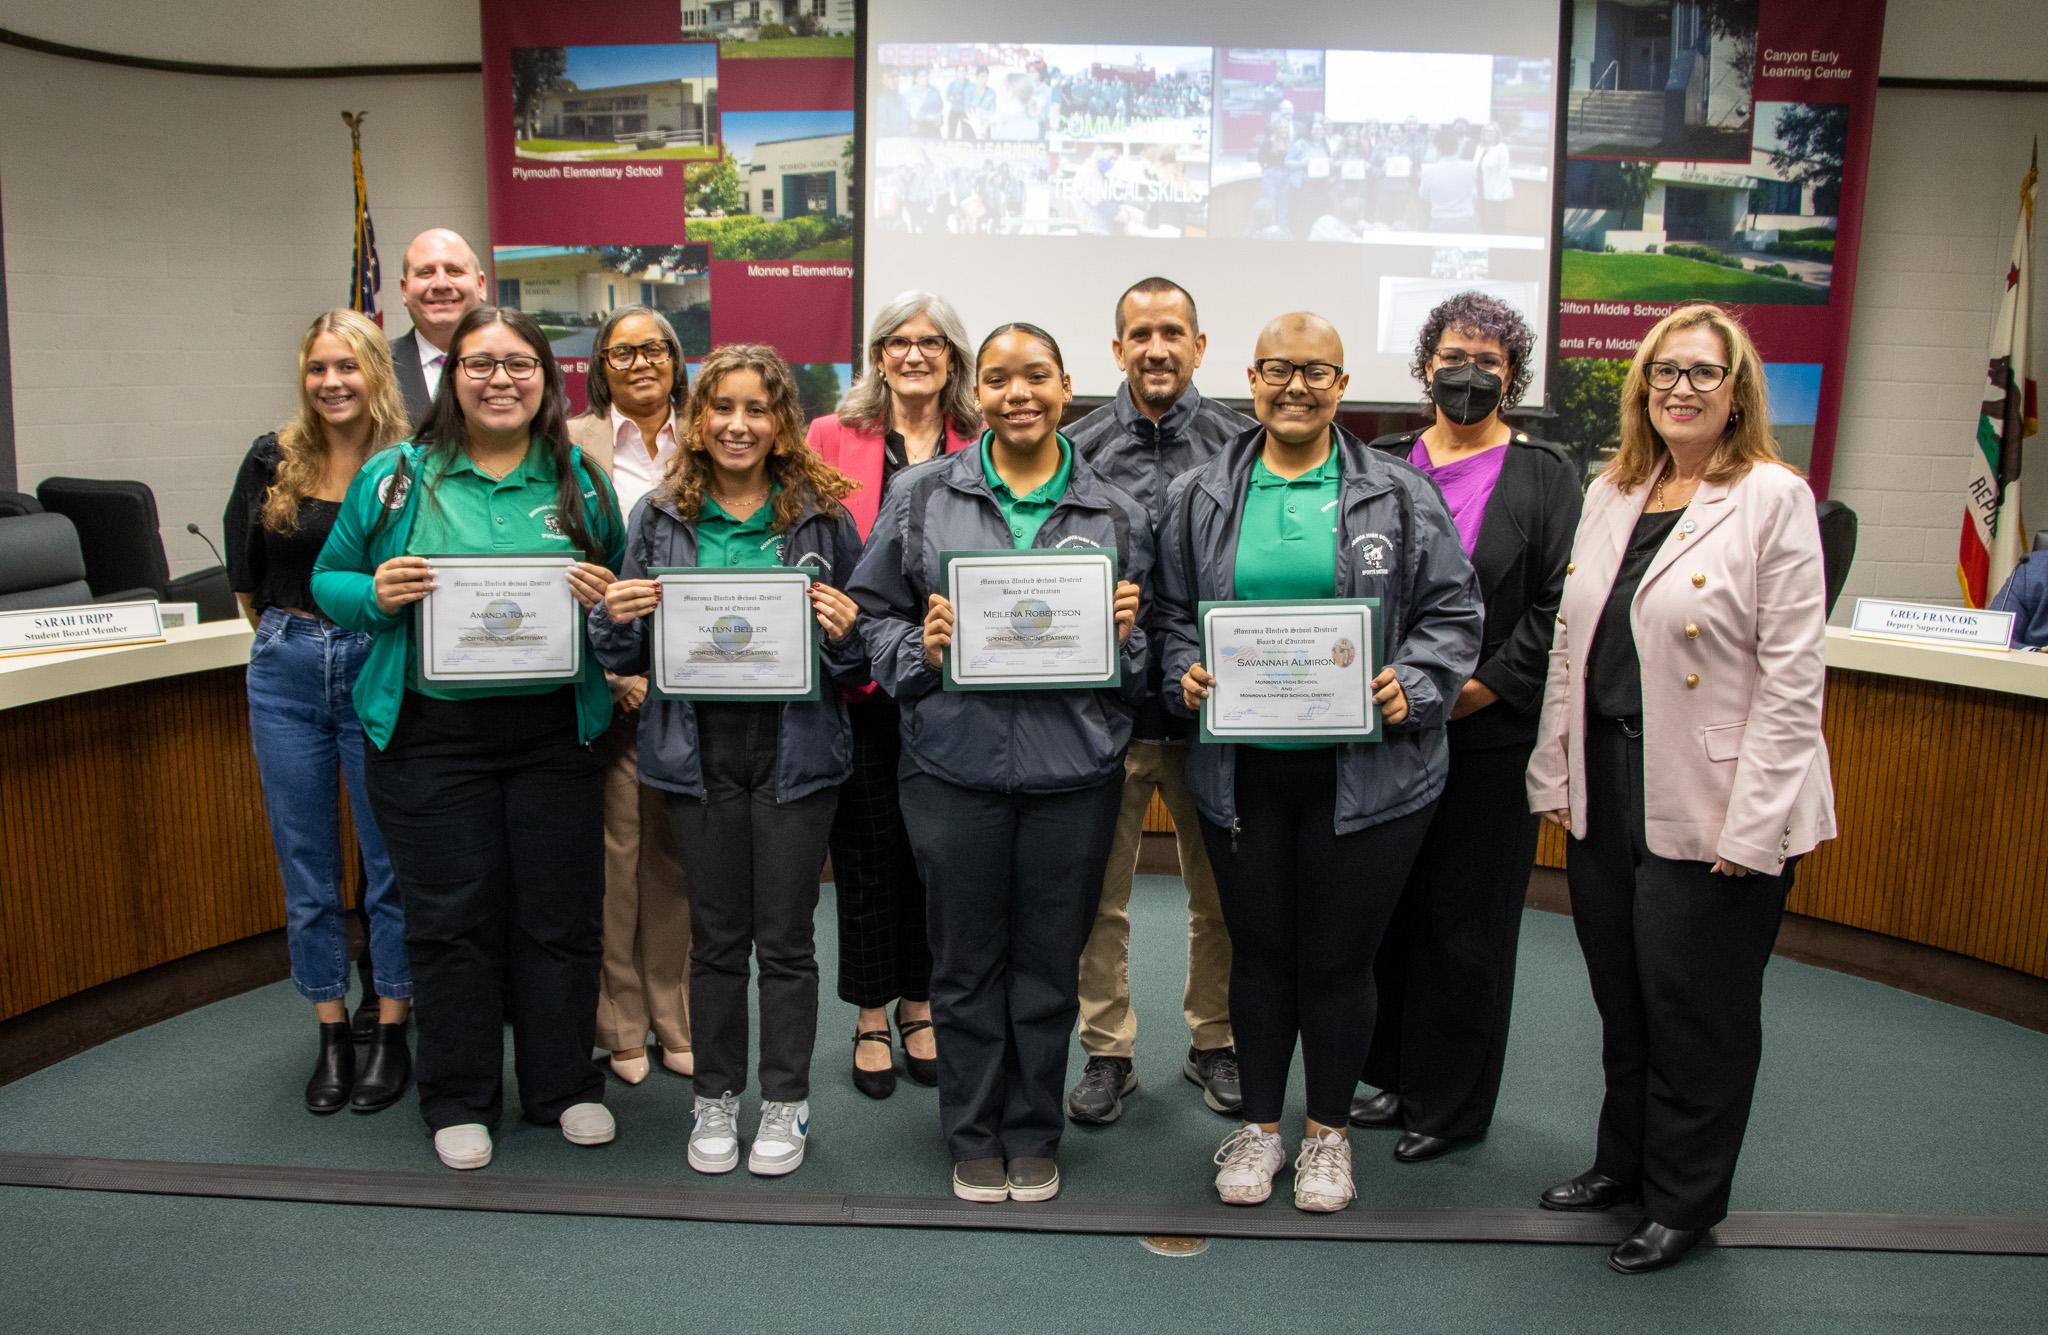 The Monrovia Unified Board of Education invited students from Monrovia High School’s Sports Medicine CTE Pathway and Canyon Oaks High School to lead the Pledge of Allegiance at its October meetings.